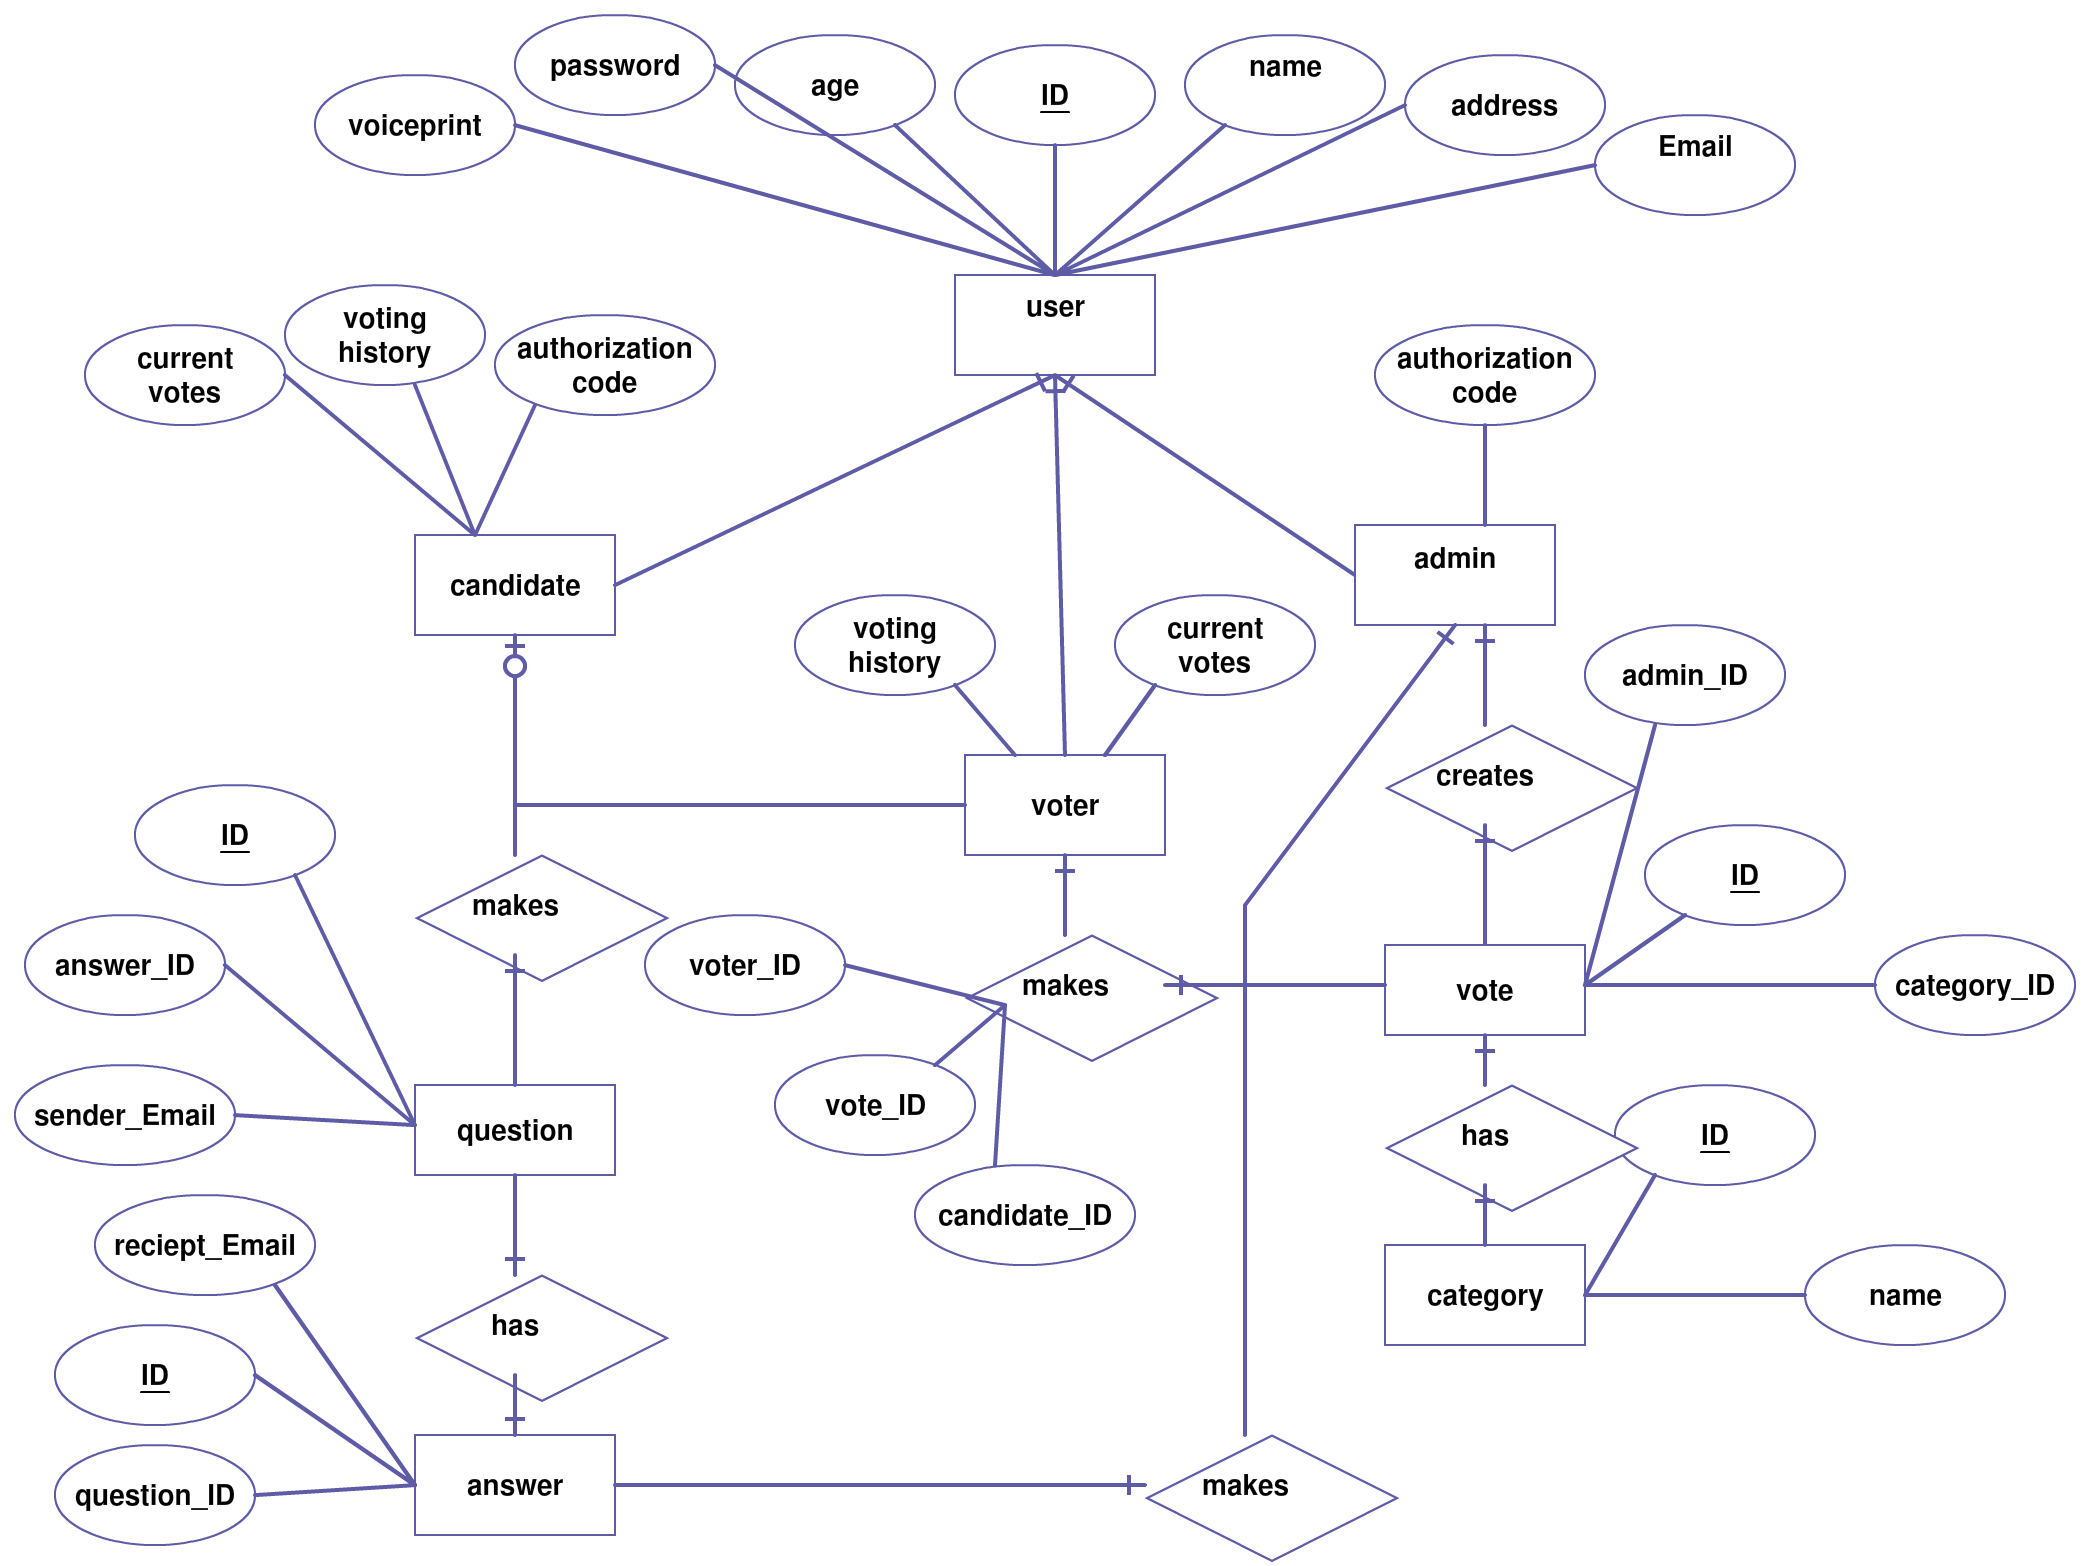 Pin On Entity Relationship Diagram Templates intended for Erd Diagram Online